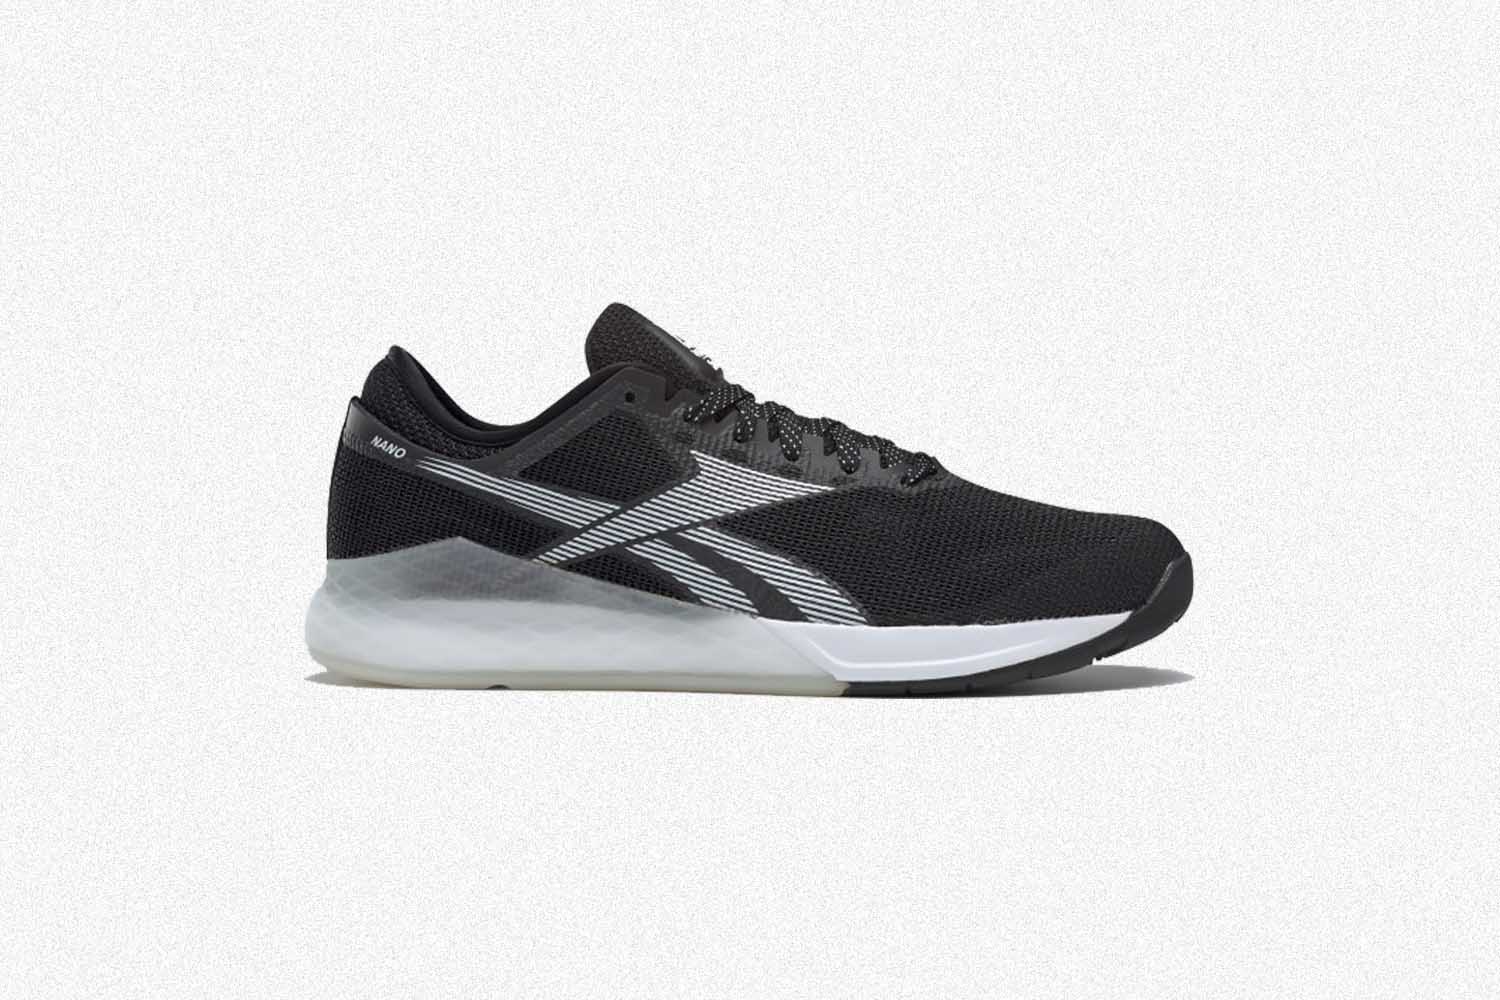 Deal: The Reebok Nano 9 Is Only $75 Right Now